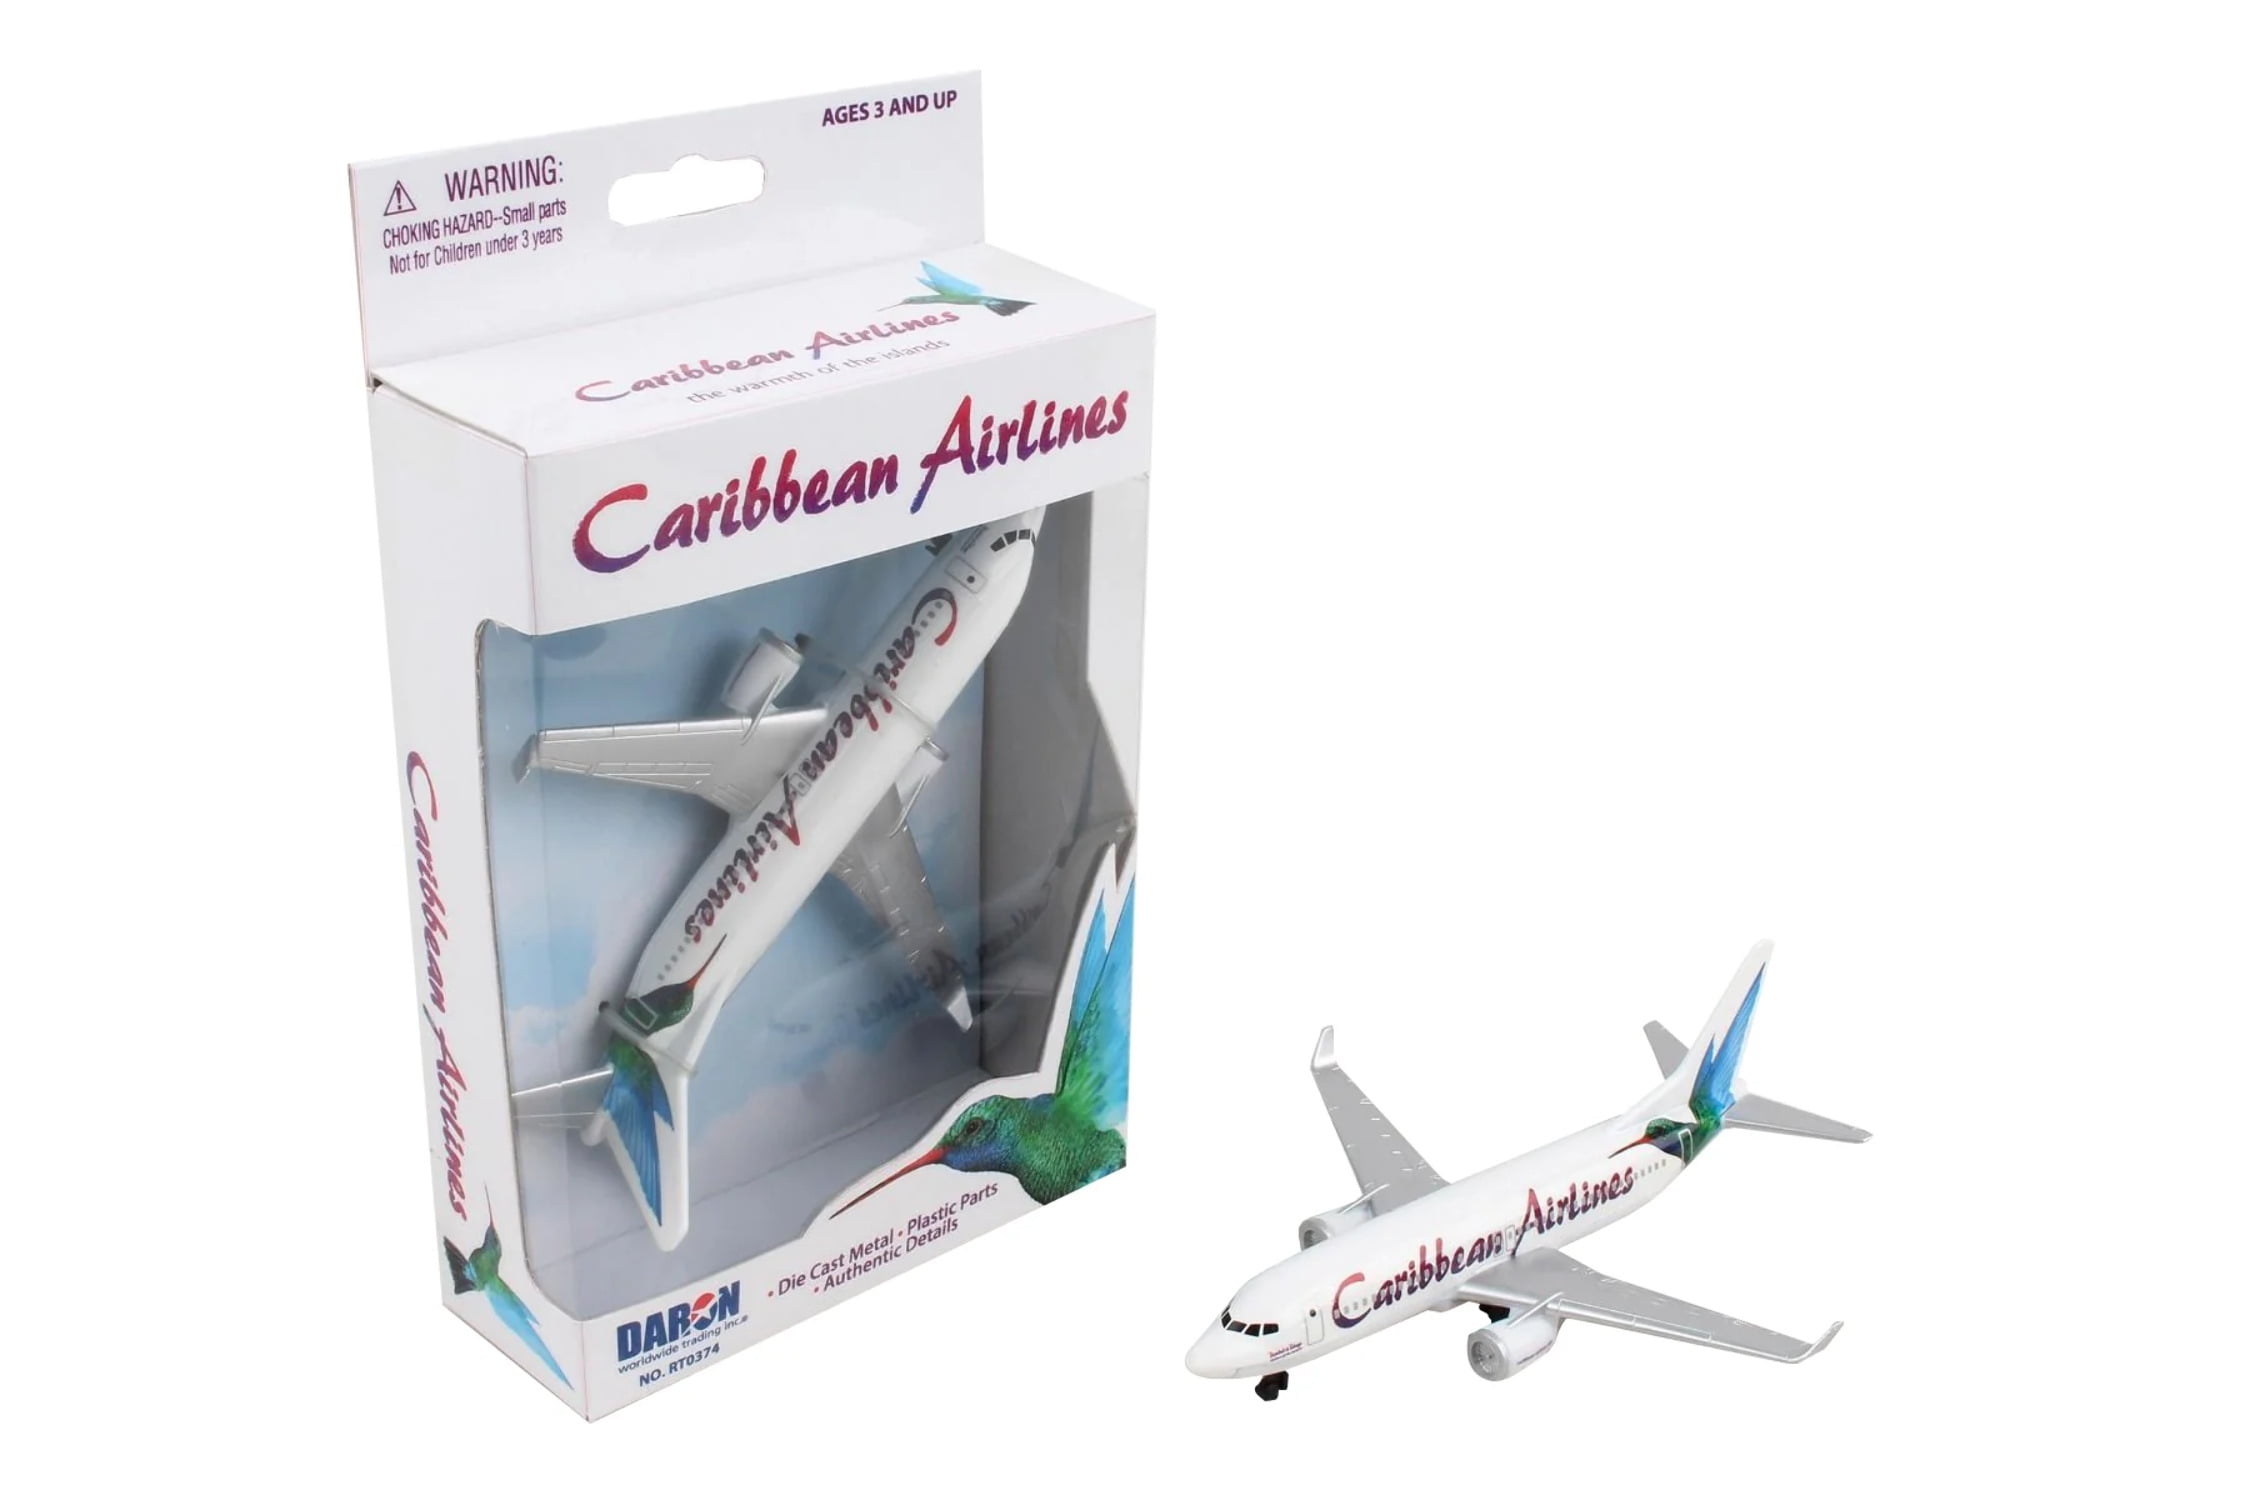 Airliner Airlines RT0374 Realtoy Caribbean Single Plane Model